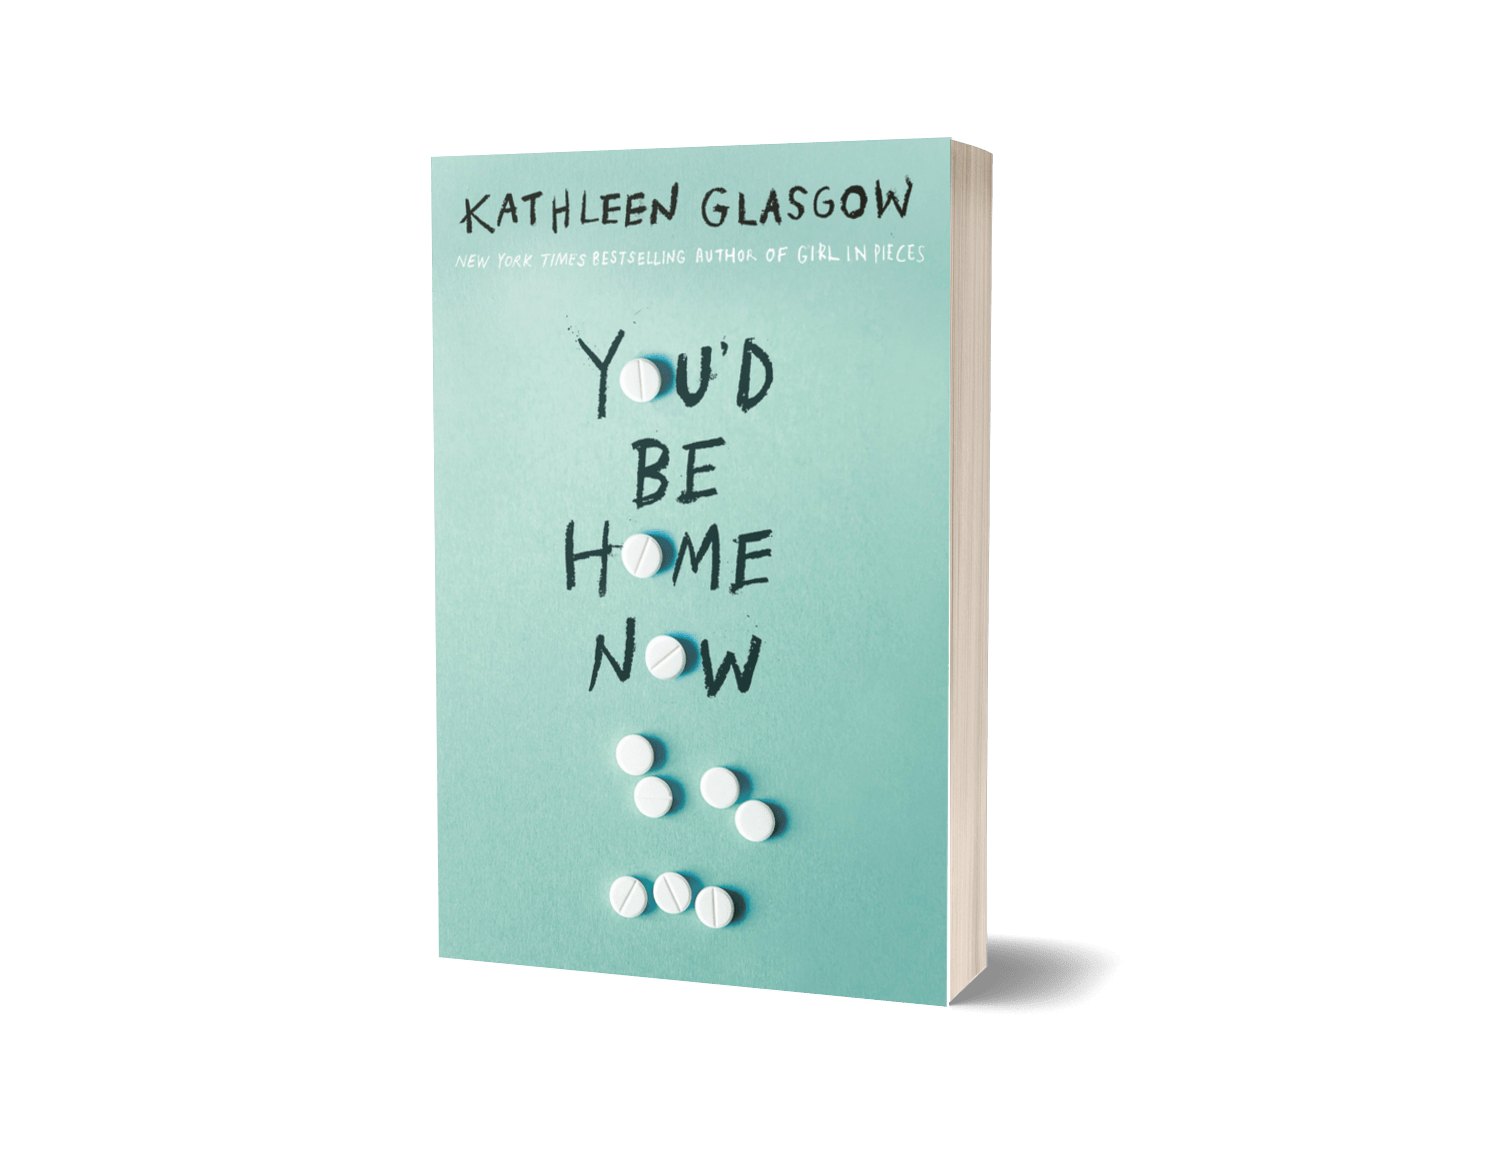 You’d be Home Now by Kathleen Glasgow